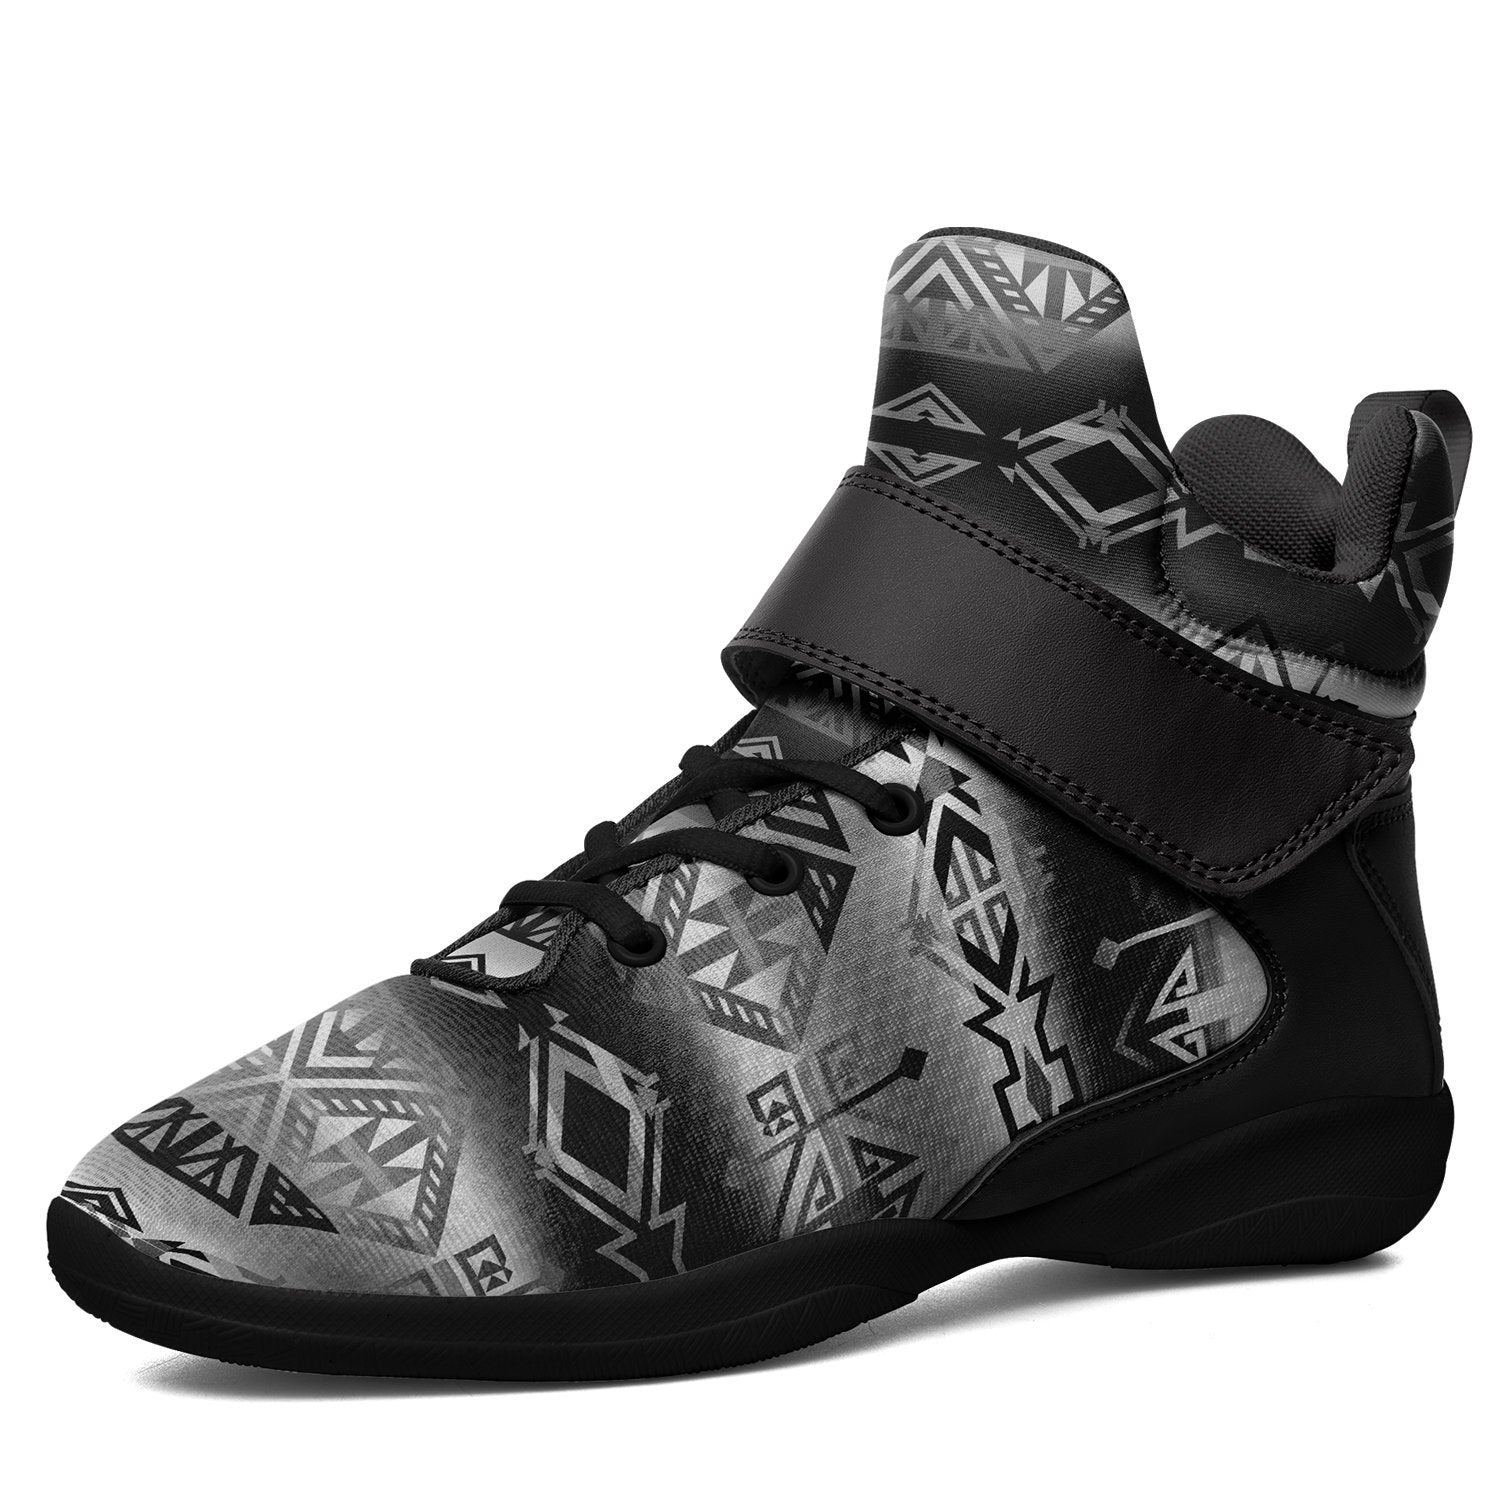 Trade Route Cave Kid's Ipottaa Basketball / Sport High Top Shoes 49 Dzine US Women 4.5 / US Youth 3.5 / EUR 35 Black Sole with Black Strap 